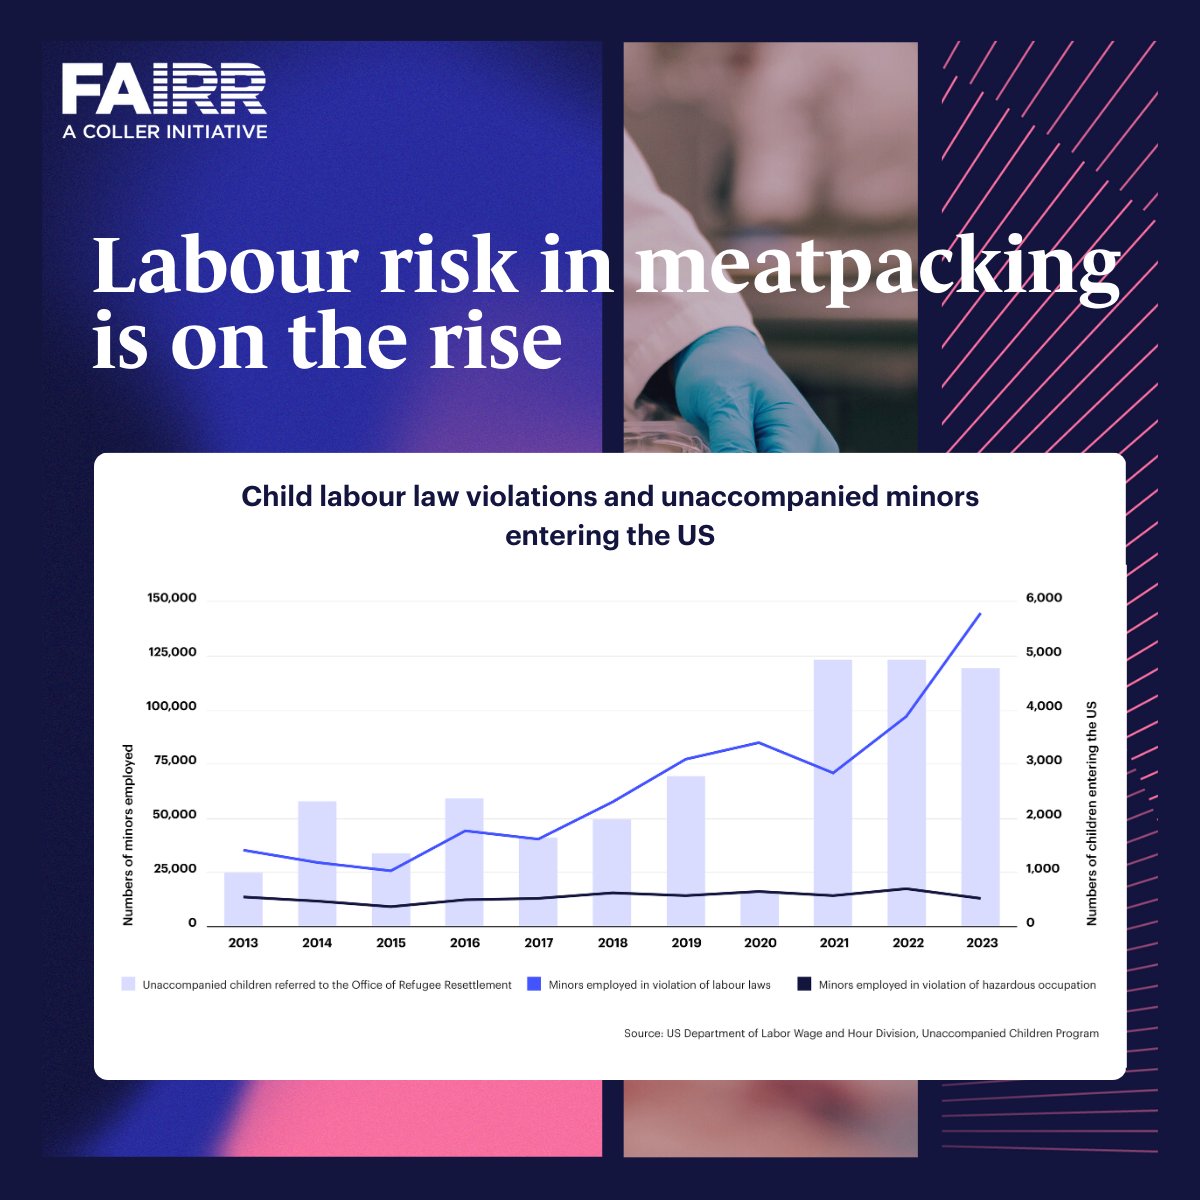 Recent data highlights subcontracted #workers face a higher risk of #labour rights abuses, with a @USDOL investigation revealing links between subcontracting and #HumanRights violations like #ChildLabor. View the graph below for more insights on child labour 👇